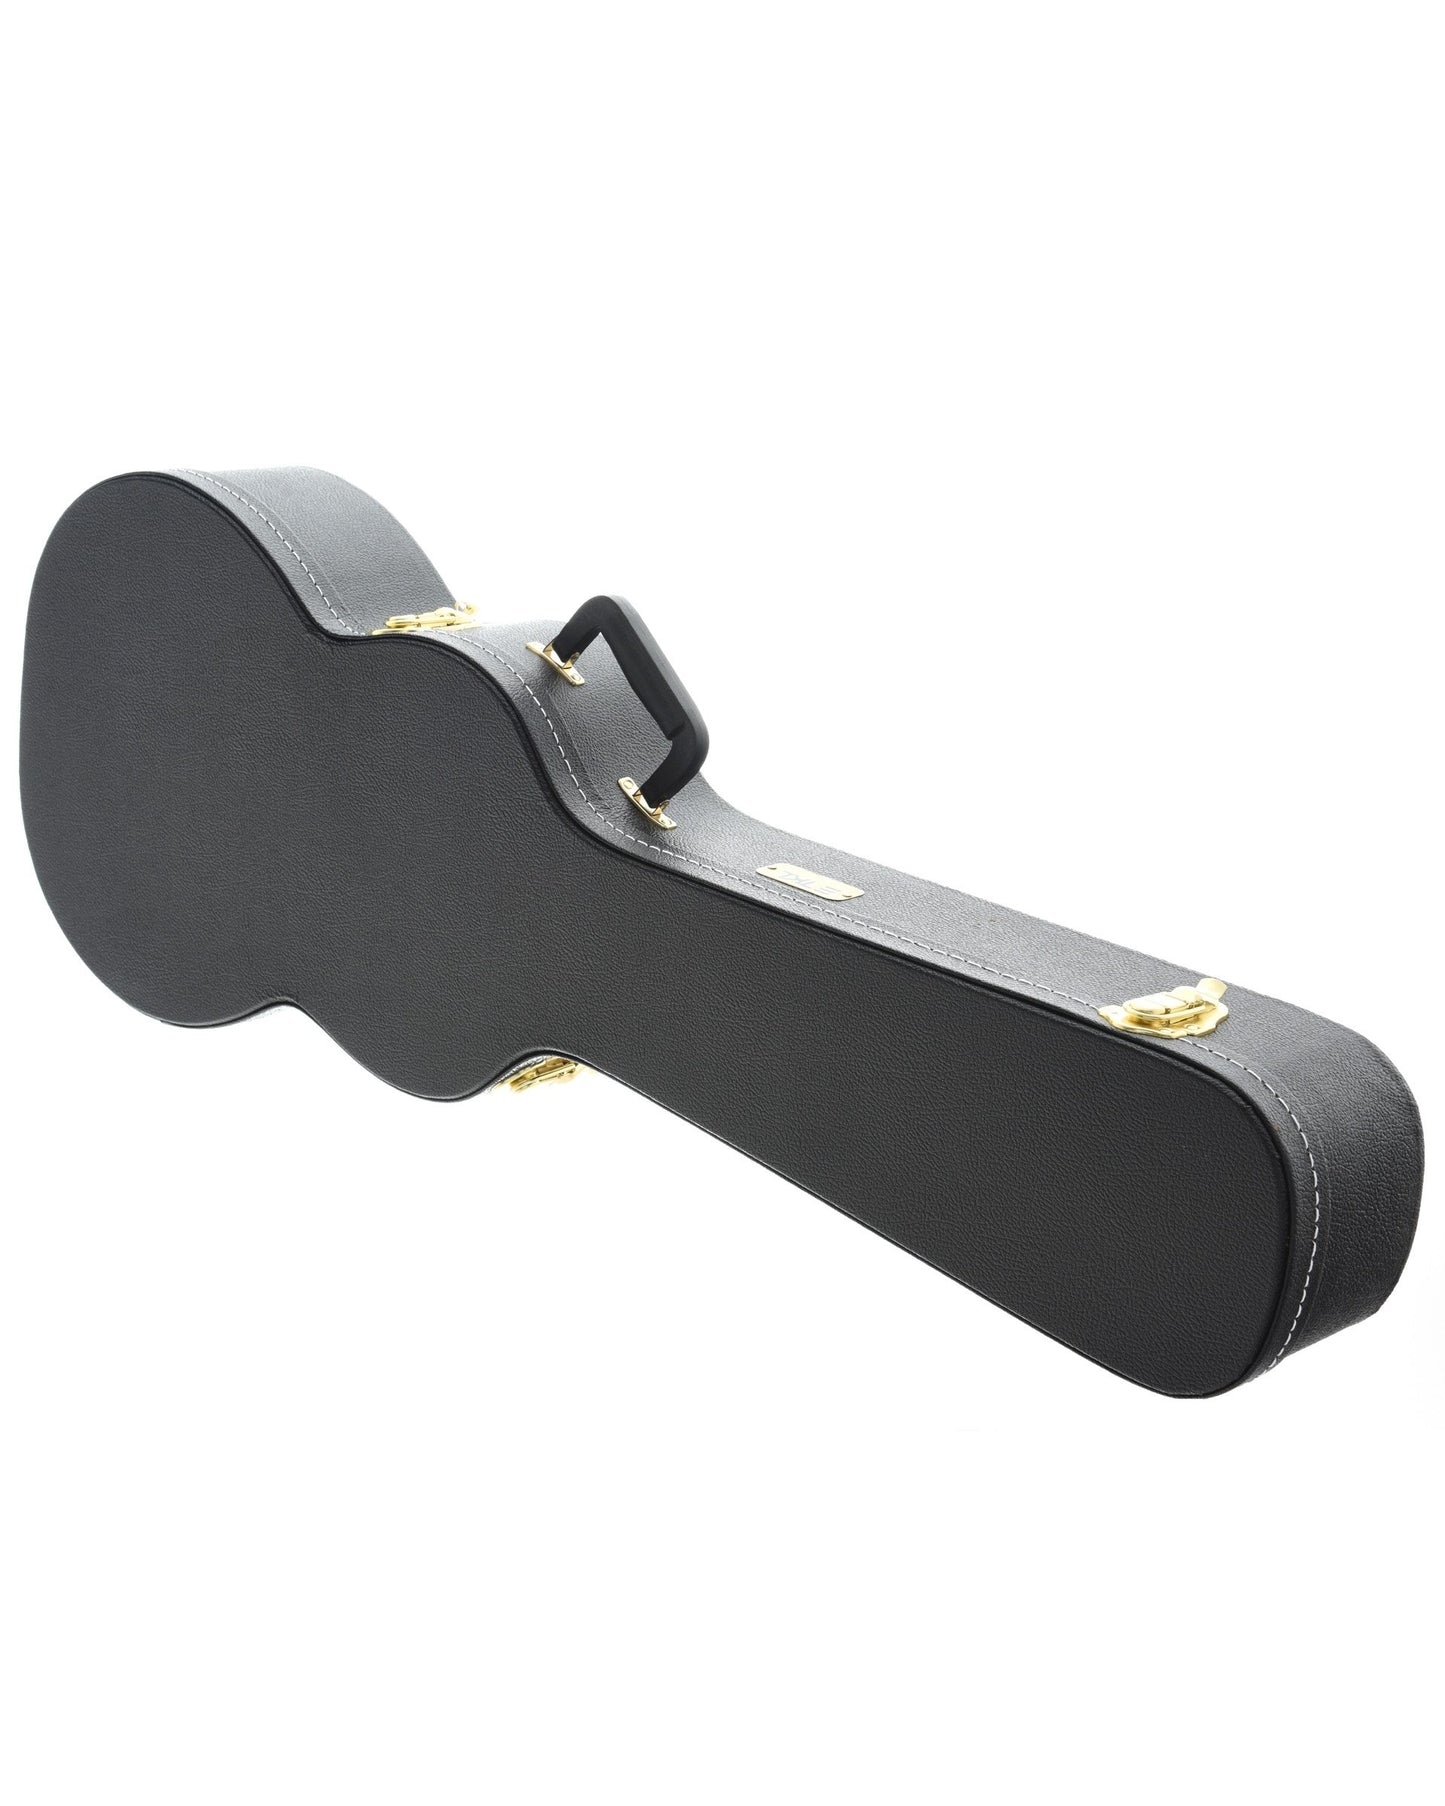 Image 1 of TKL Premier Series "00" Guitar Case - SKU# GCEV-00F : Product Type Accessories & Parts : Elderly Instruments